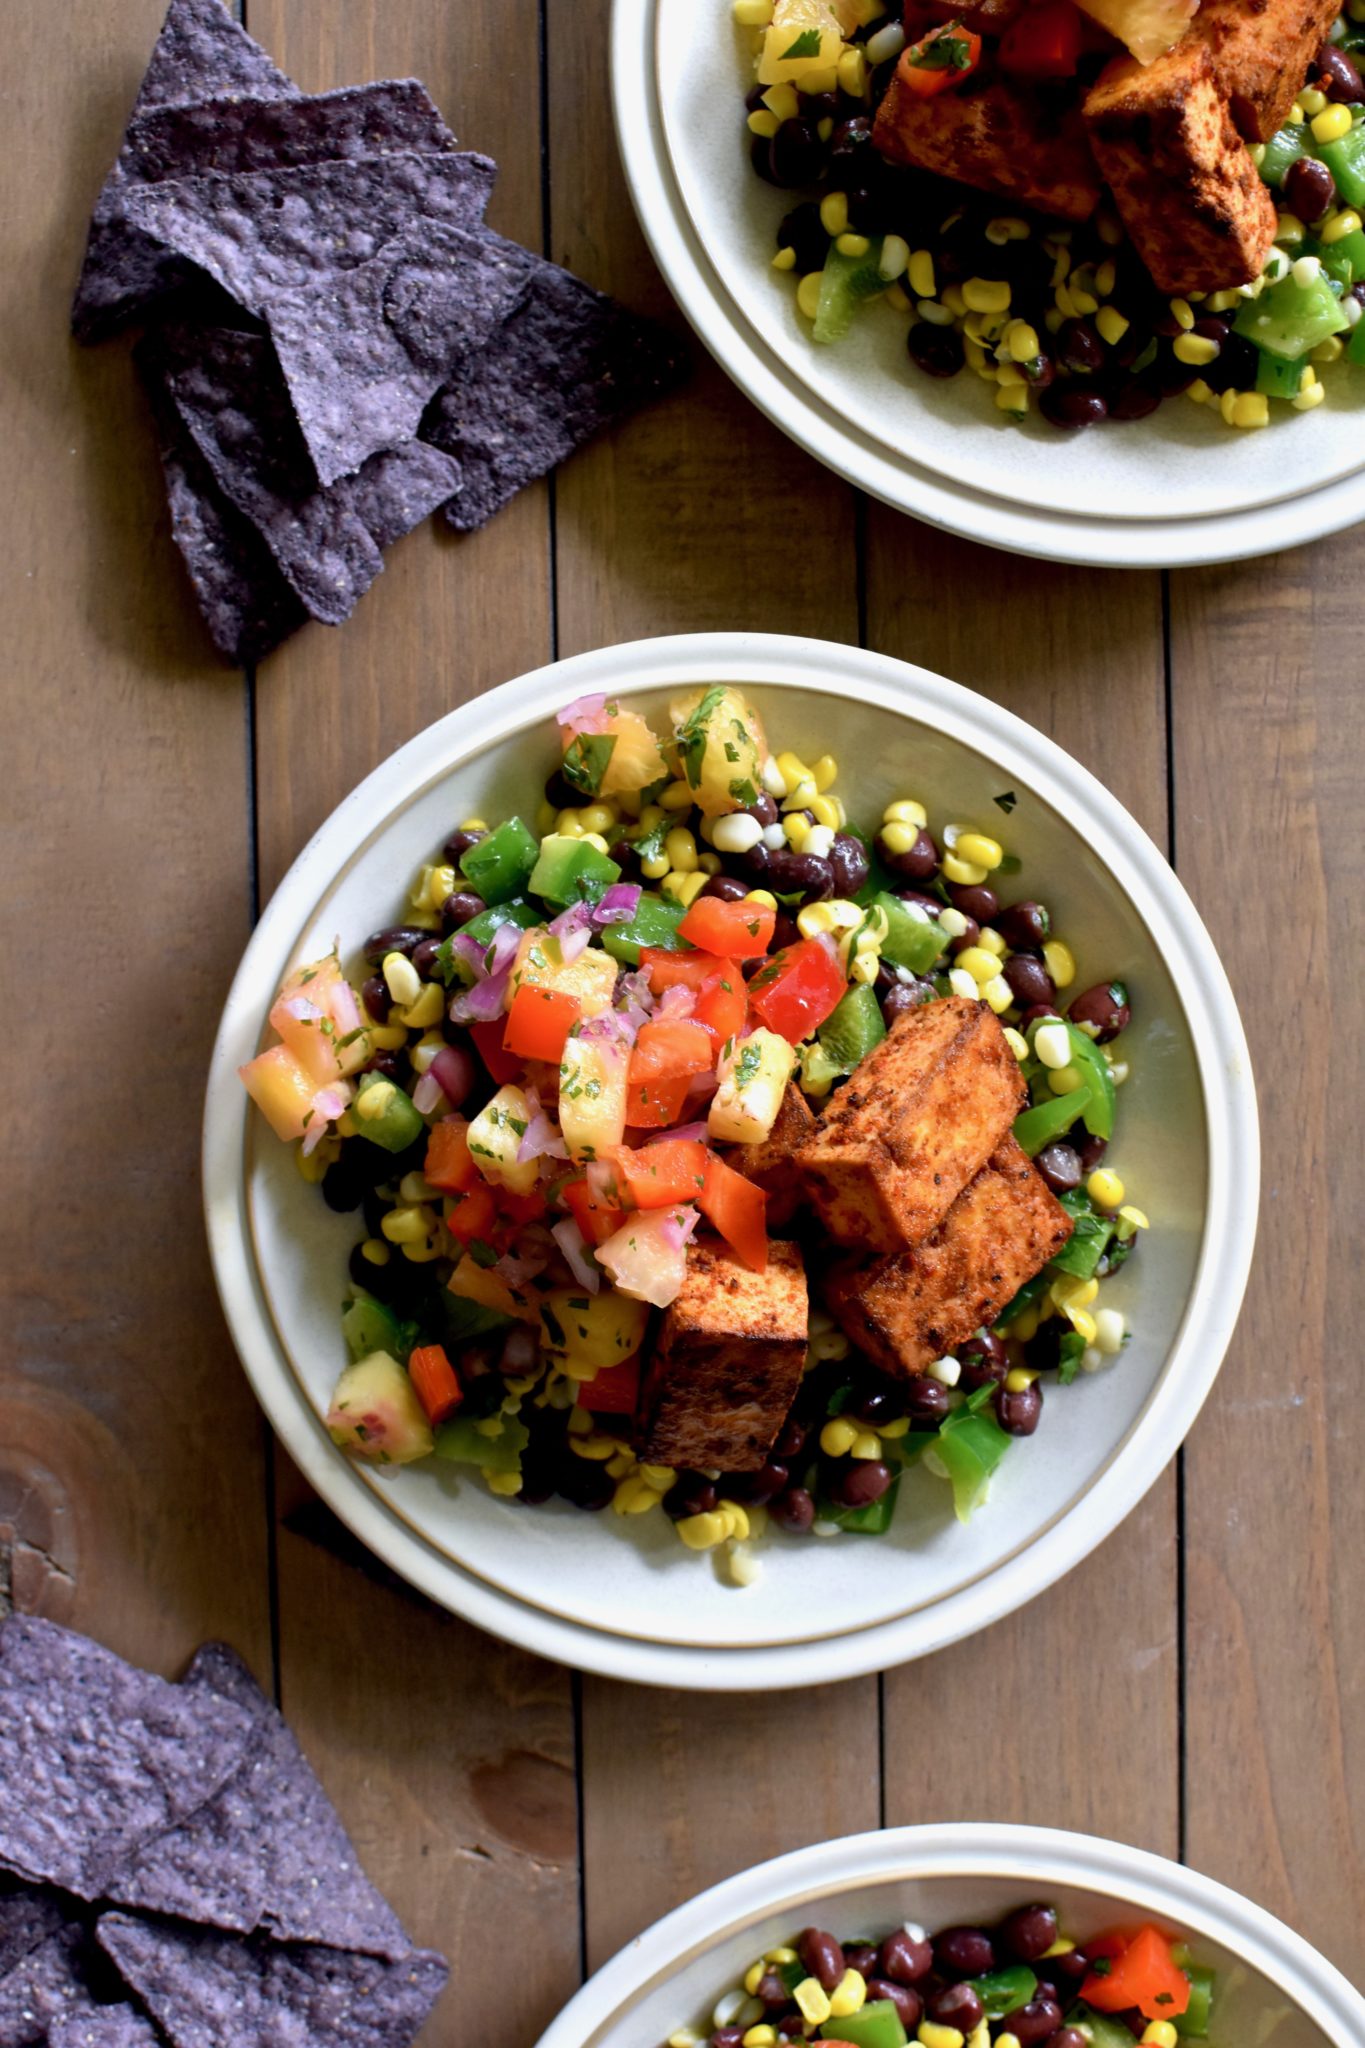 chili-spiced tofu bowl with pepper lime corn and pineapple salsa // cait's plate